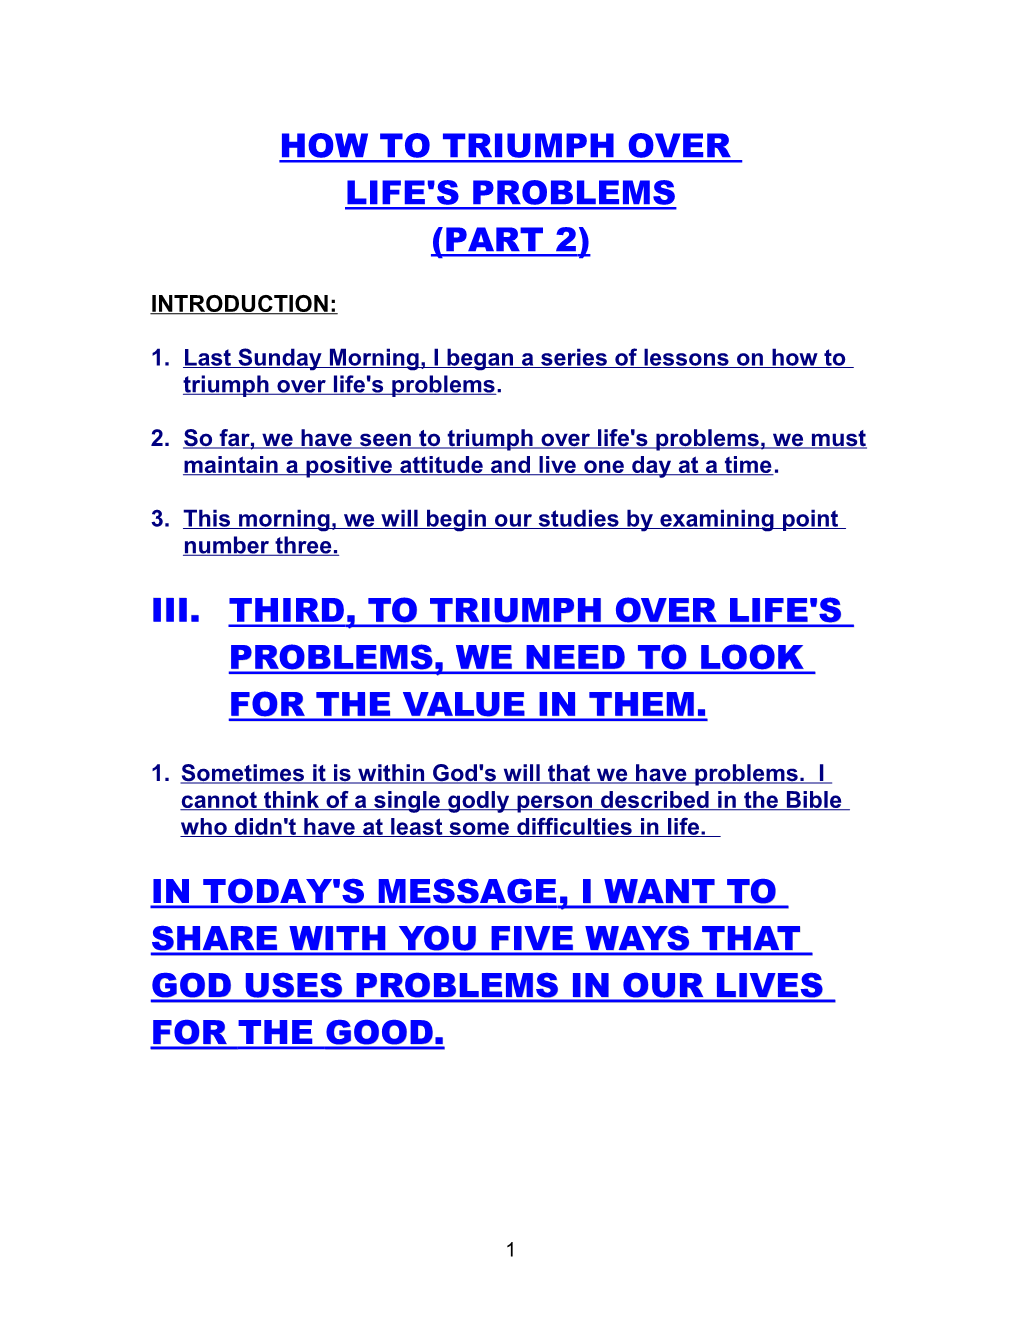 How to Triumph Over Life's Problems (Part 2)